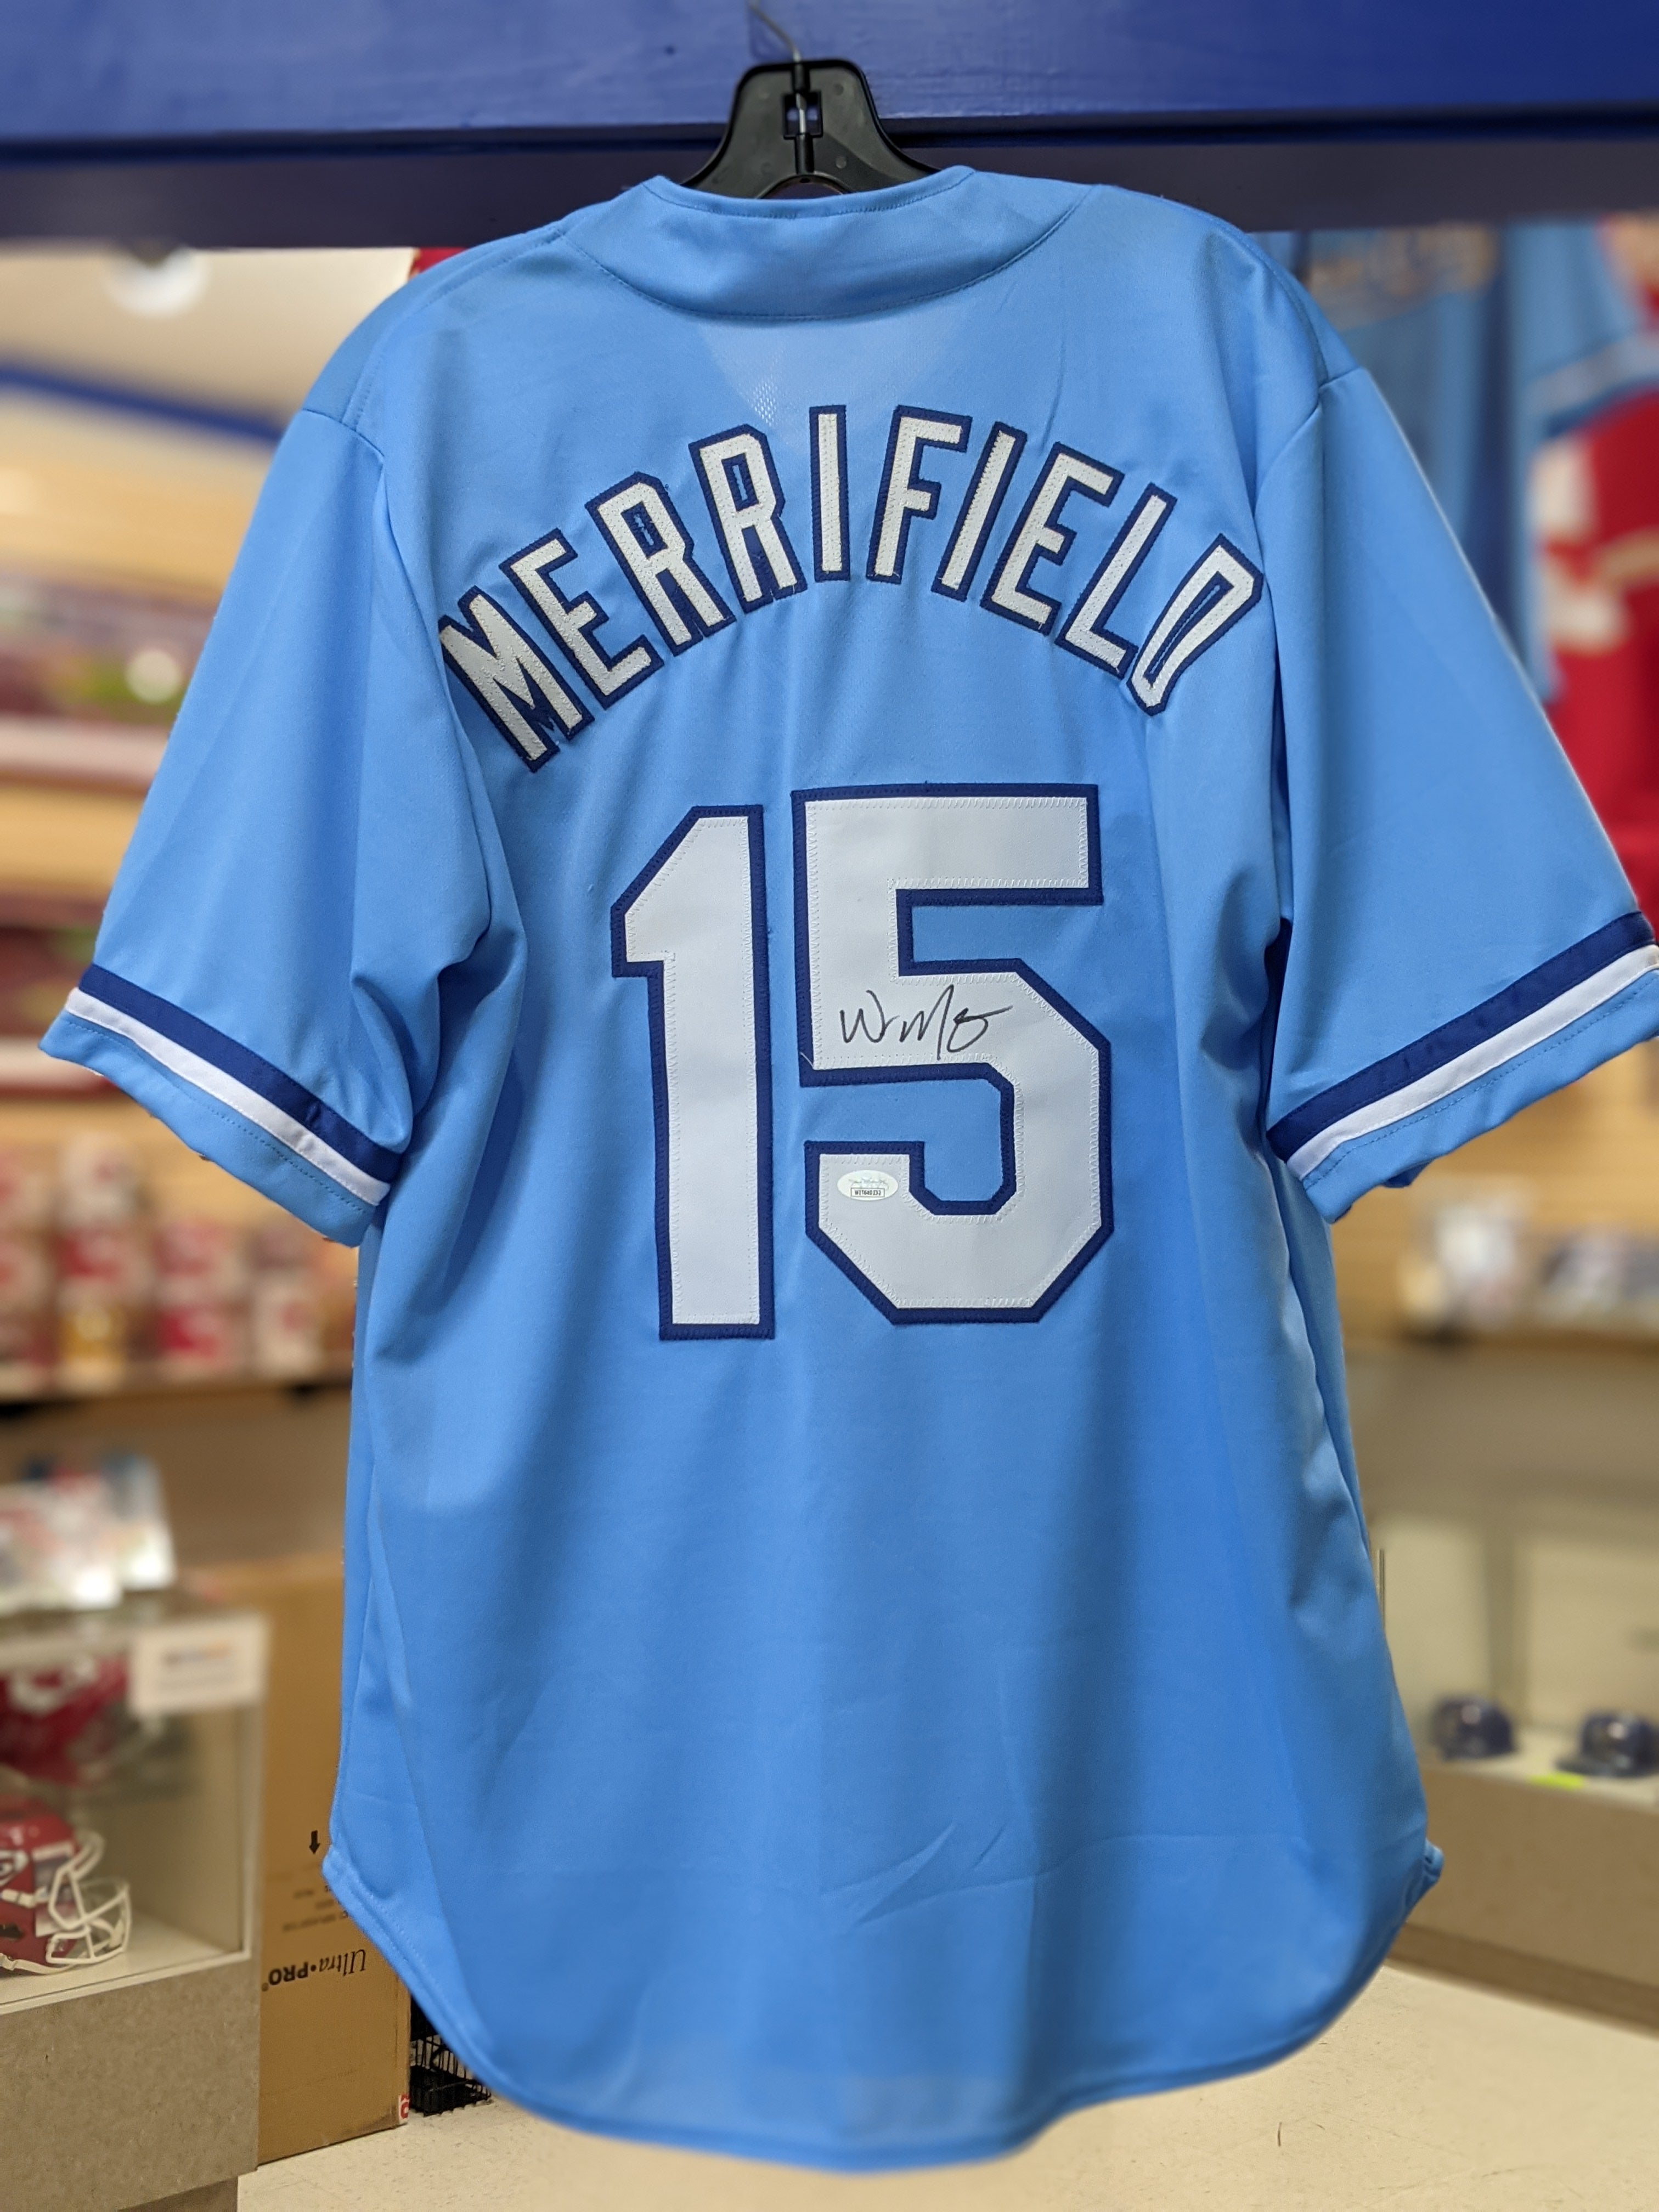 Autographed Jersey: Whit Merrifield #15 - 'Here's To 2022!' Inscription -  Size 44